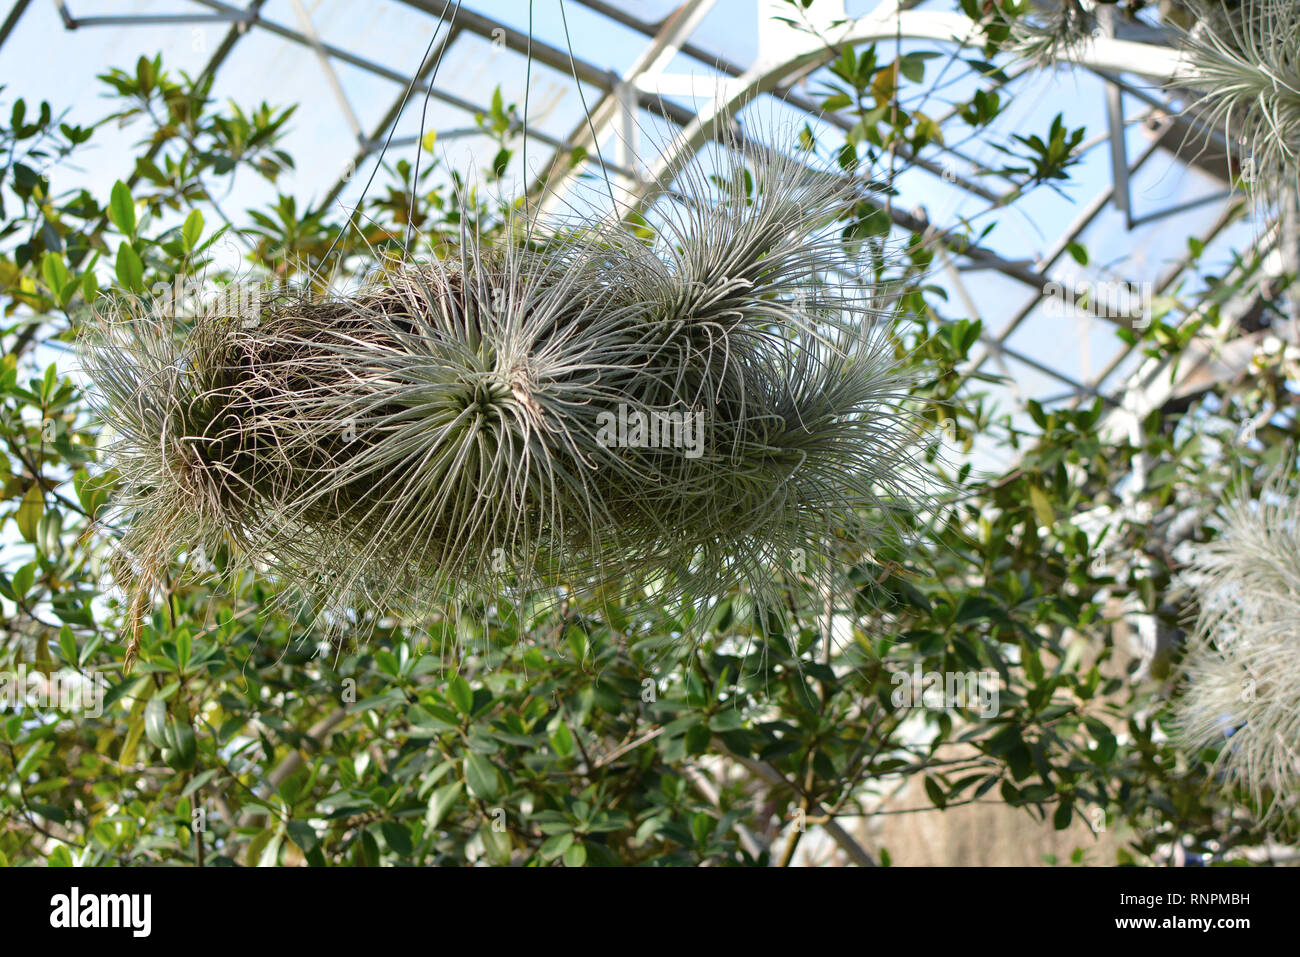 Huge hanging Tillandsia Airplant capable of absorbing ambient humidity without roots Stock Photo